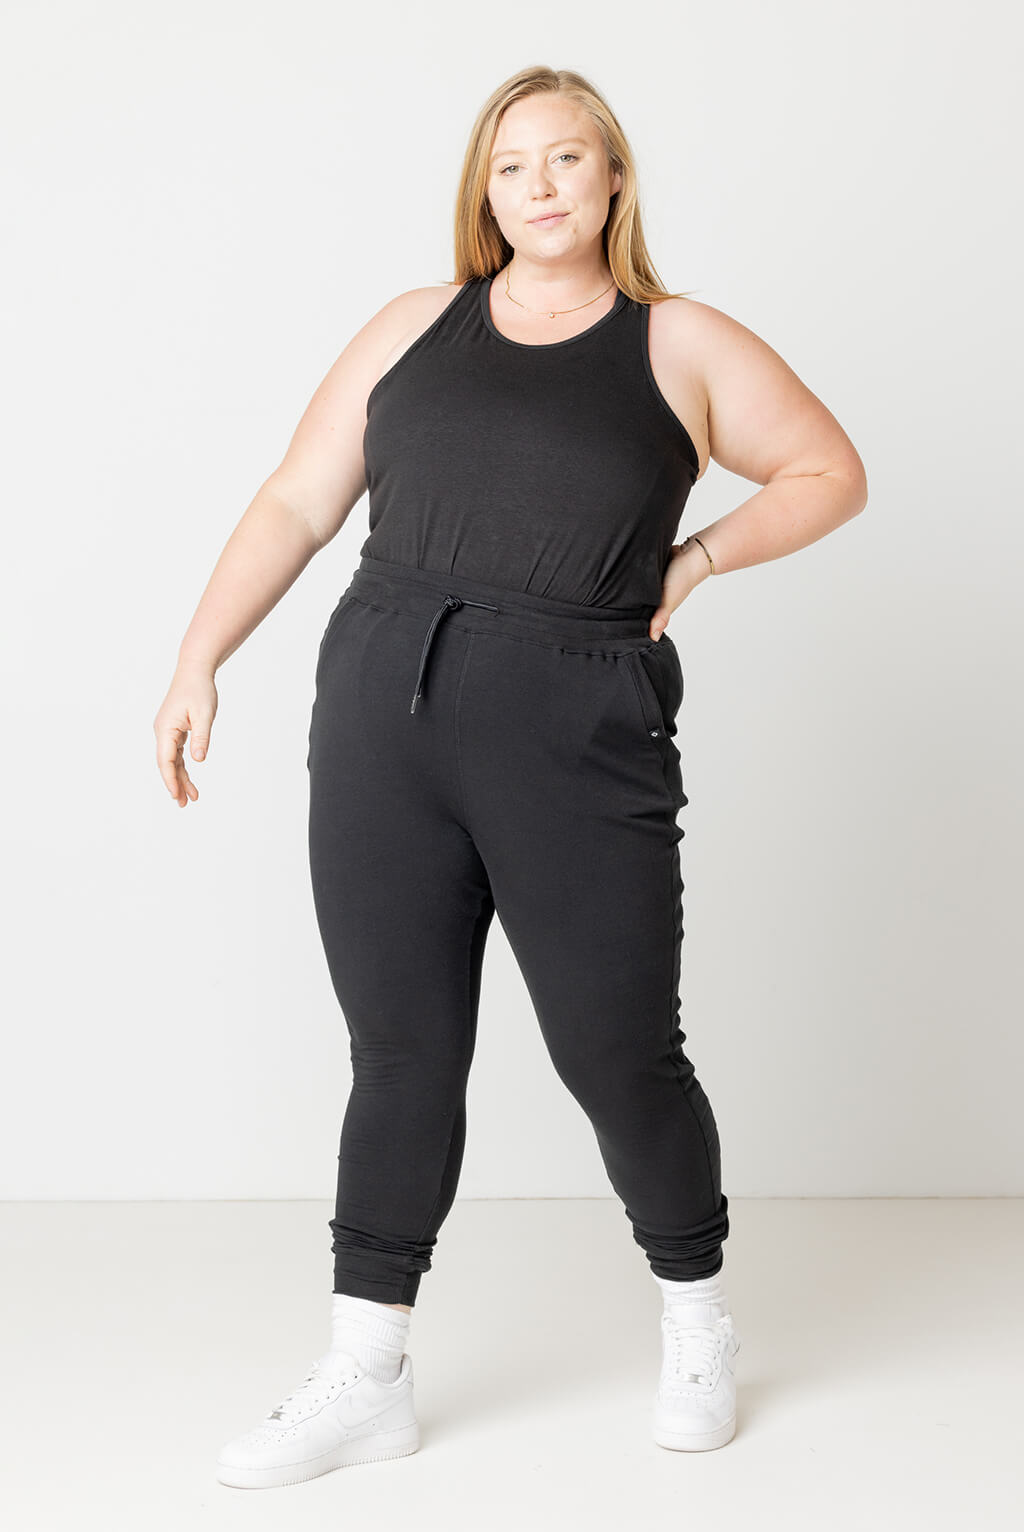 Superfit Hero - Size Inclusive High Performance Leggings by Micki